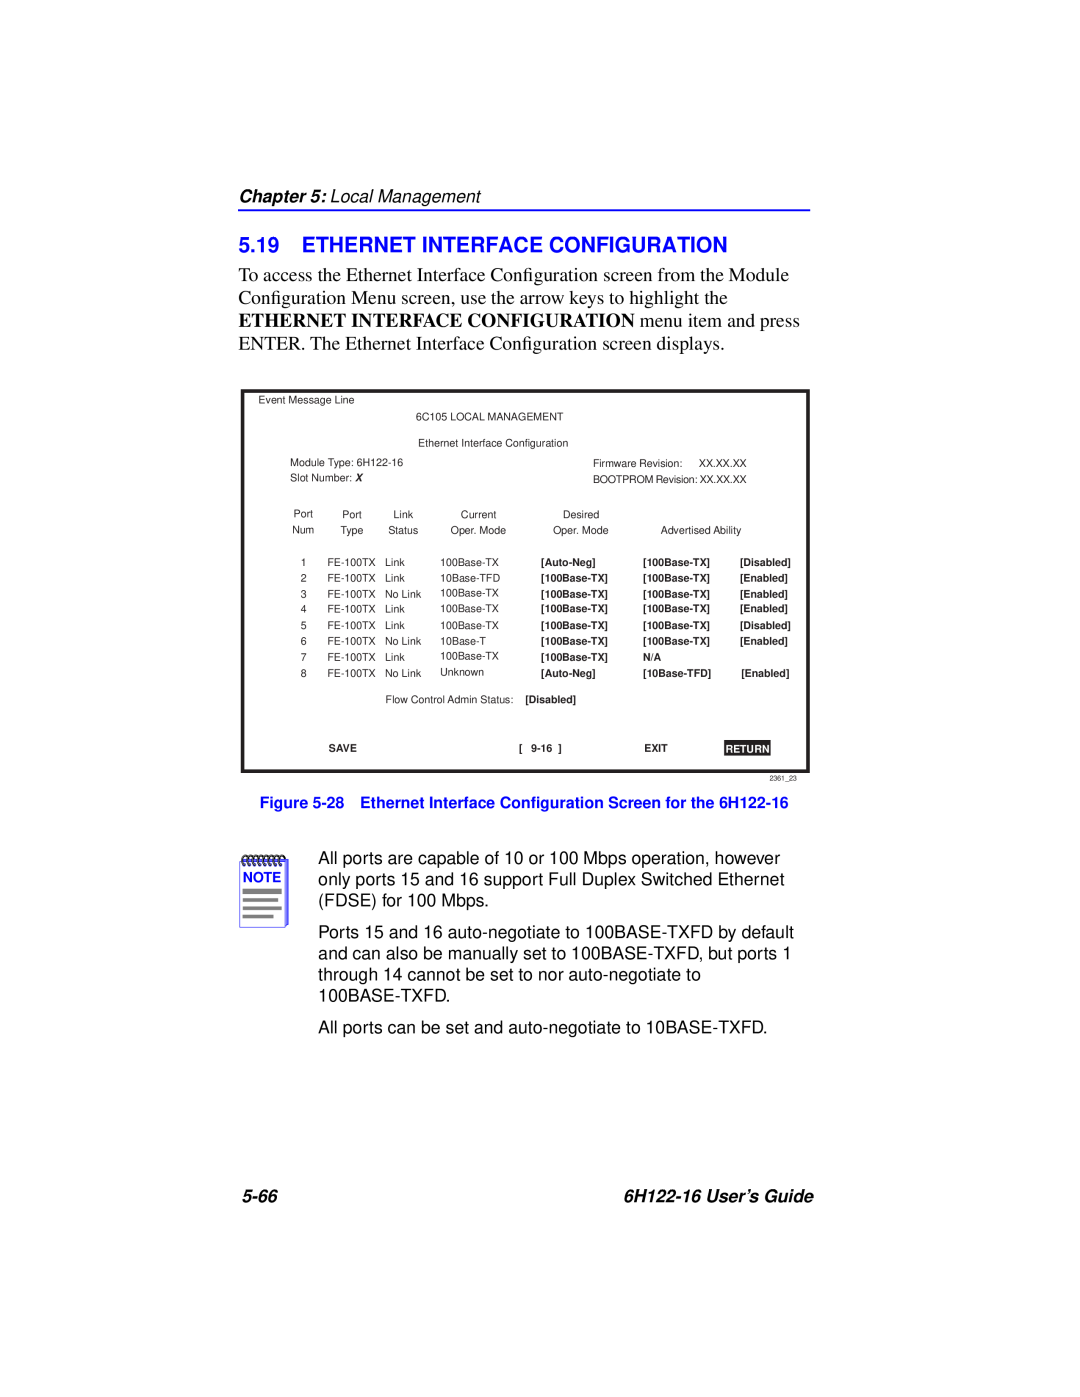 Cabletron Systems manual Ethernet Interface Configuration, Local Management, 5-66, 6H122-16 User’s Guide 